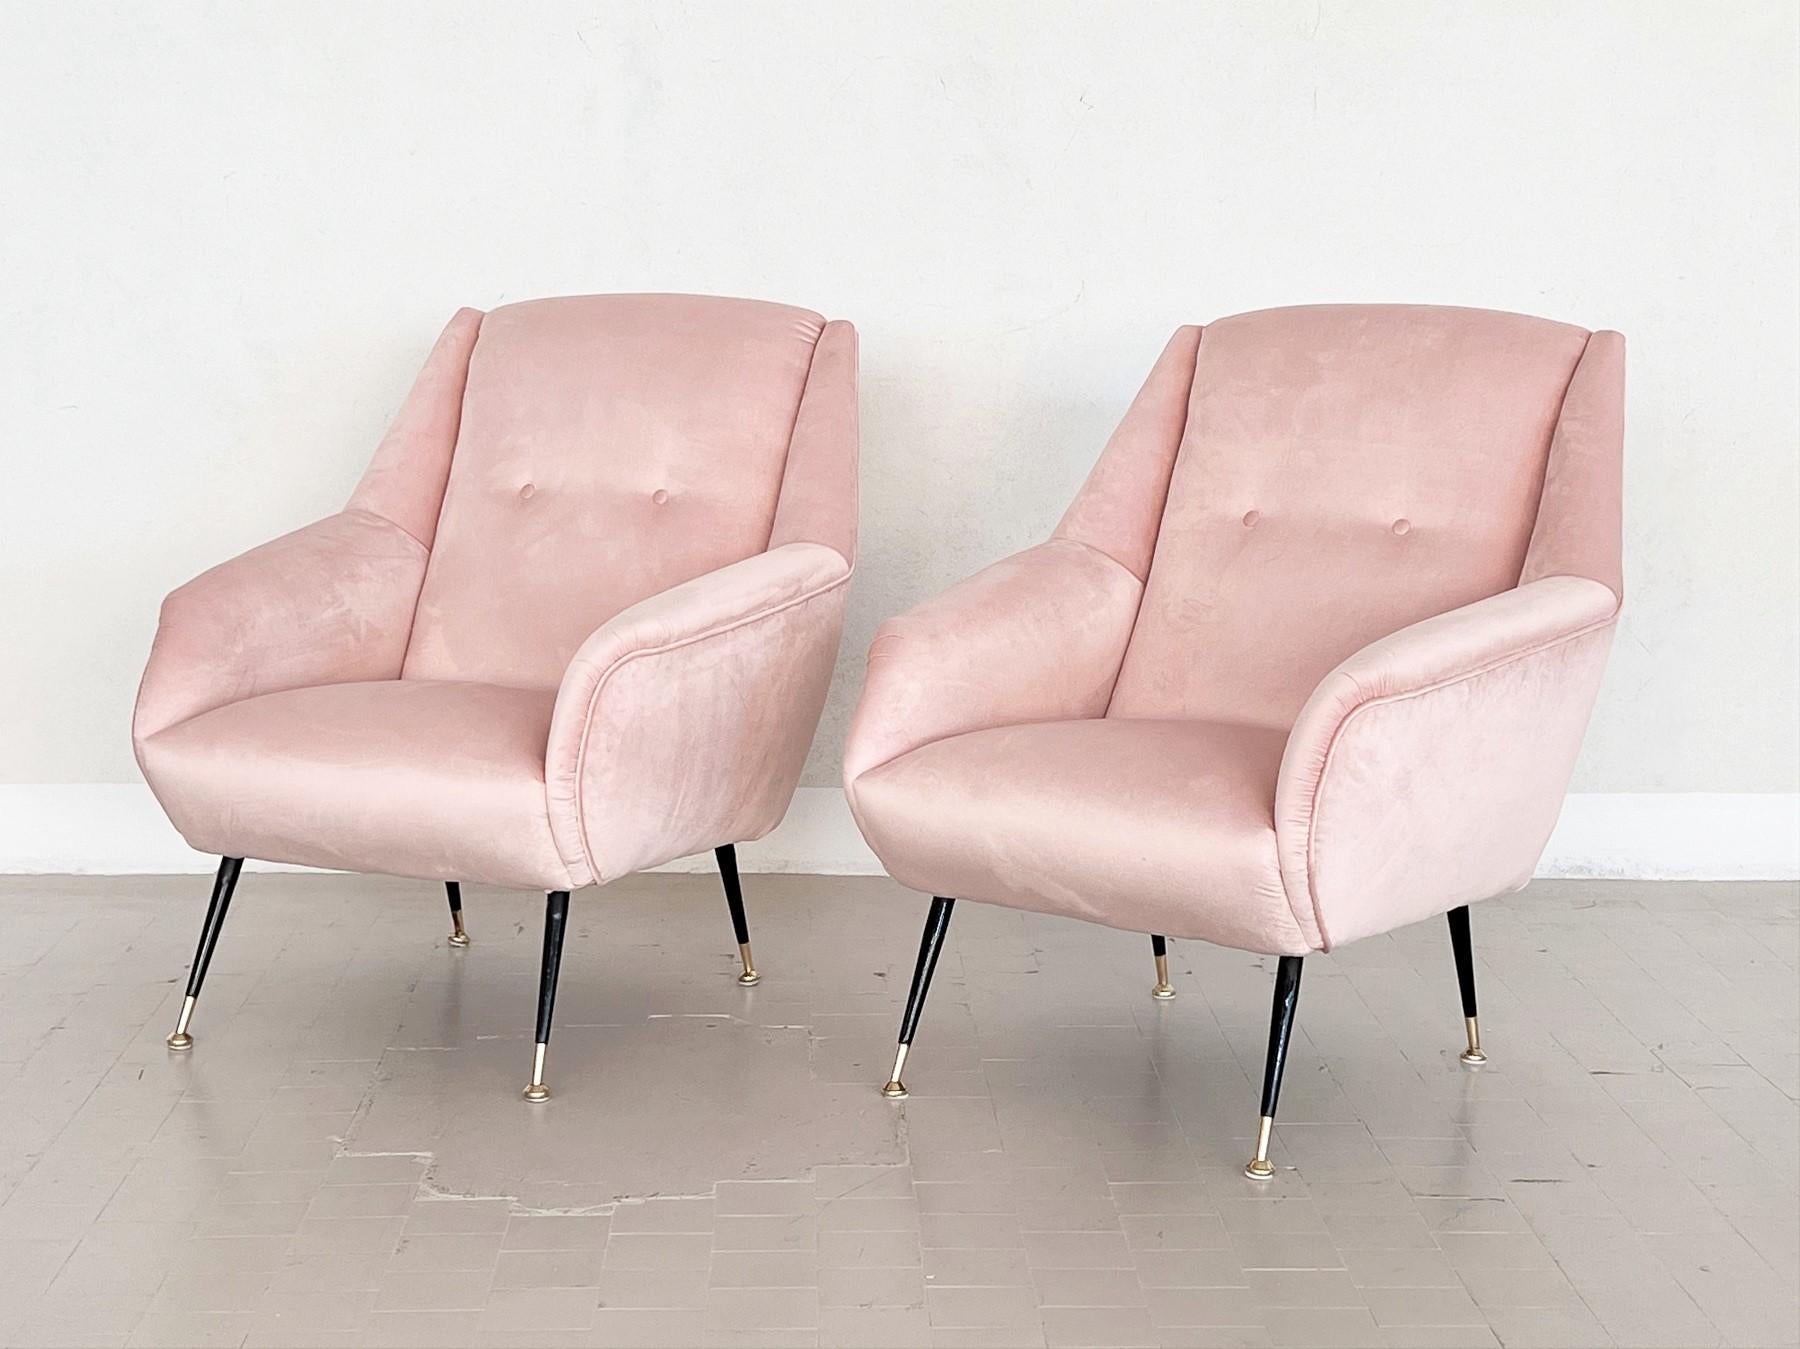 Mid-20th Century Italian Midcentury Armchairs in Soft Pink Velvet and Brass Tips, 1950s For Sale